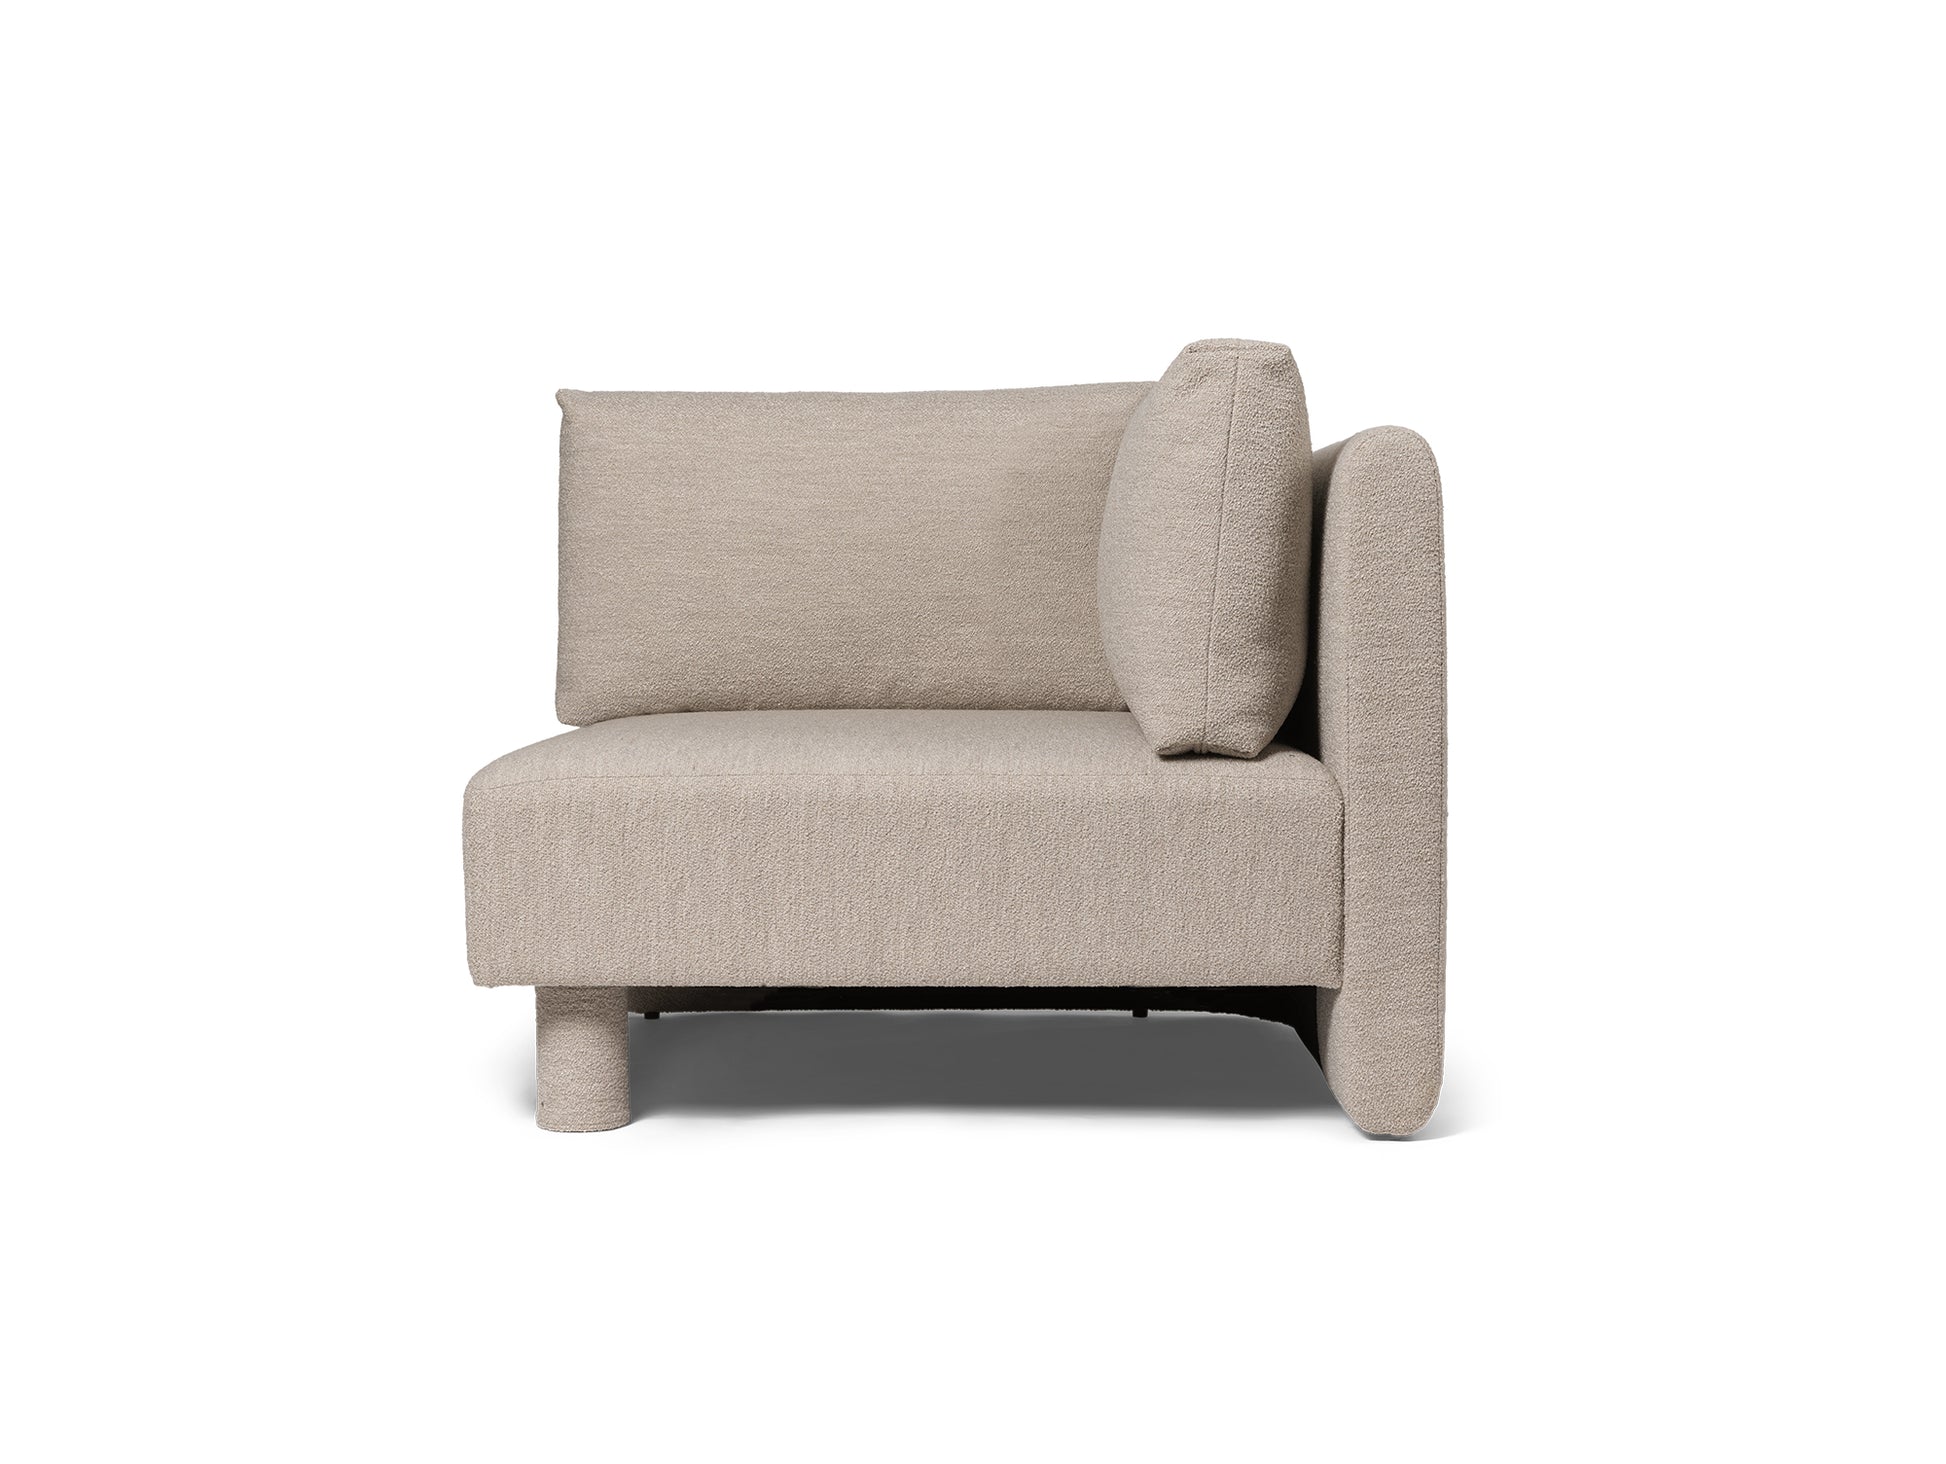 Dase Modular Sofa - Individual Modules by Ferm Living - Connecting Corner Module / Soft Boucle / Natural